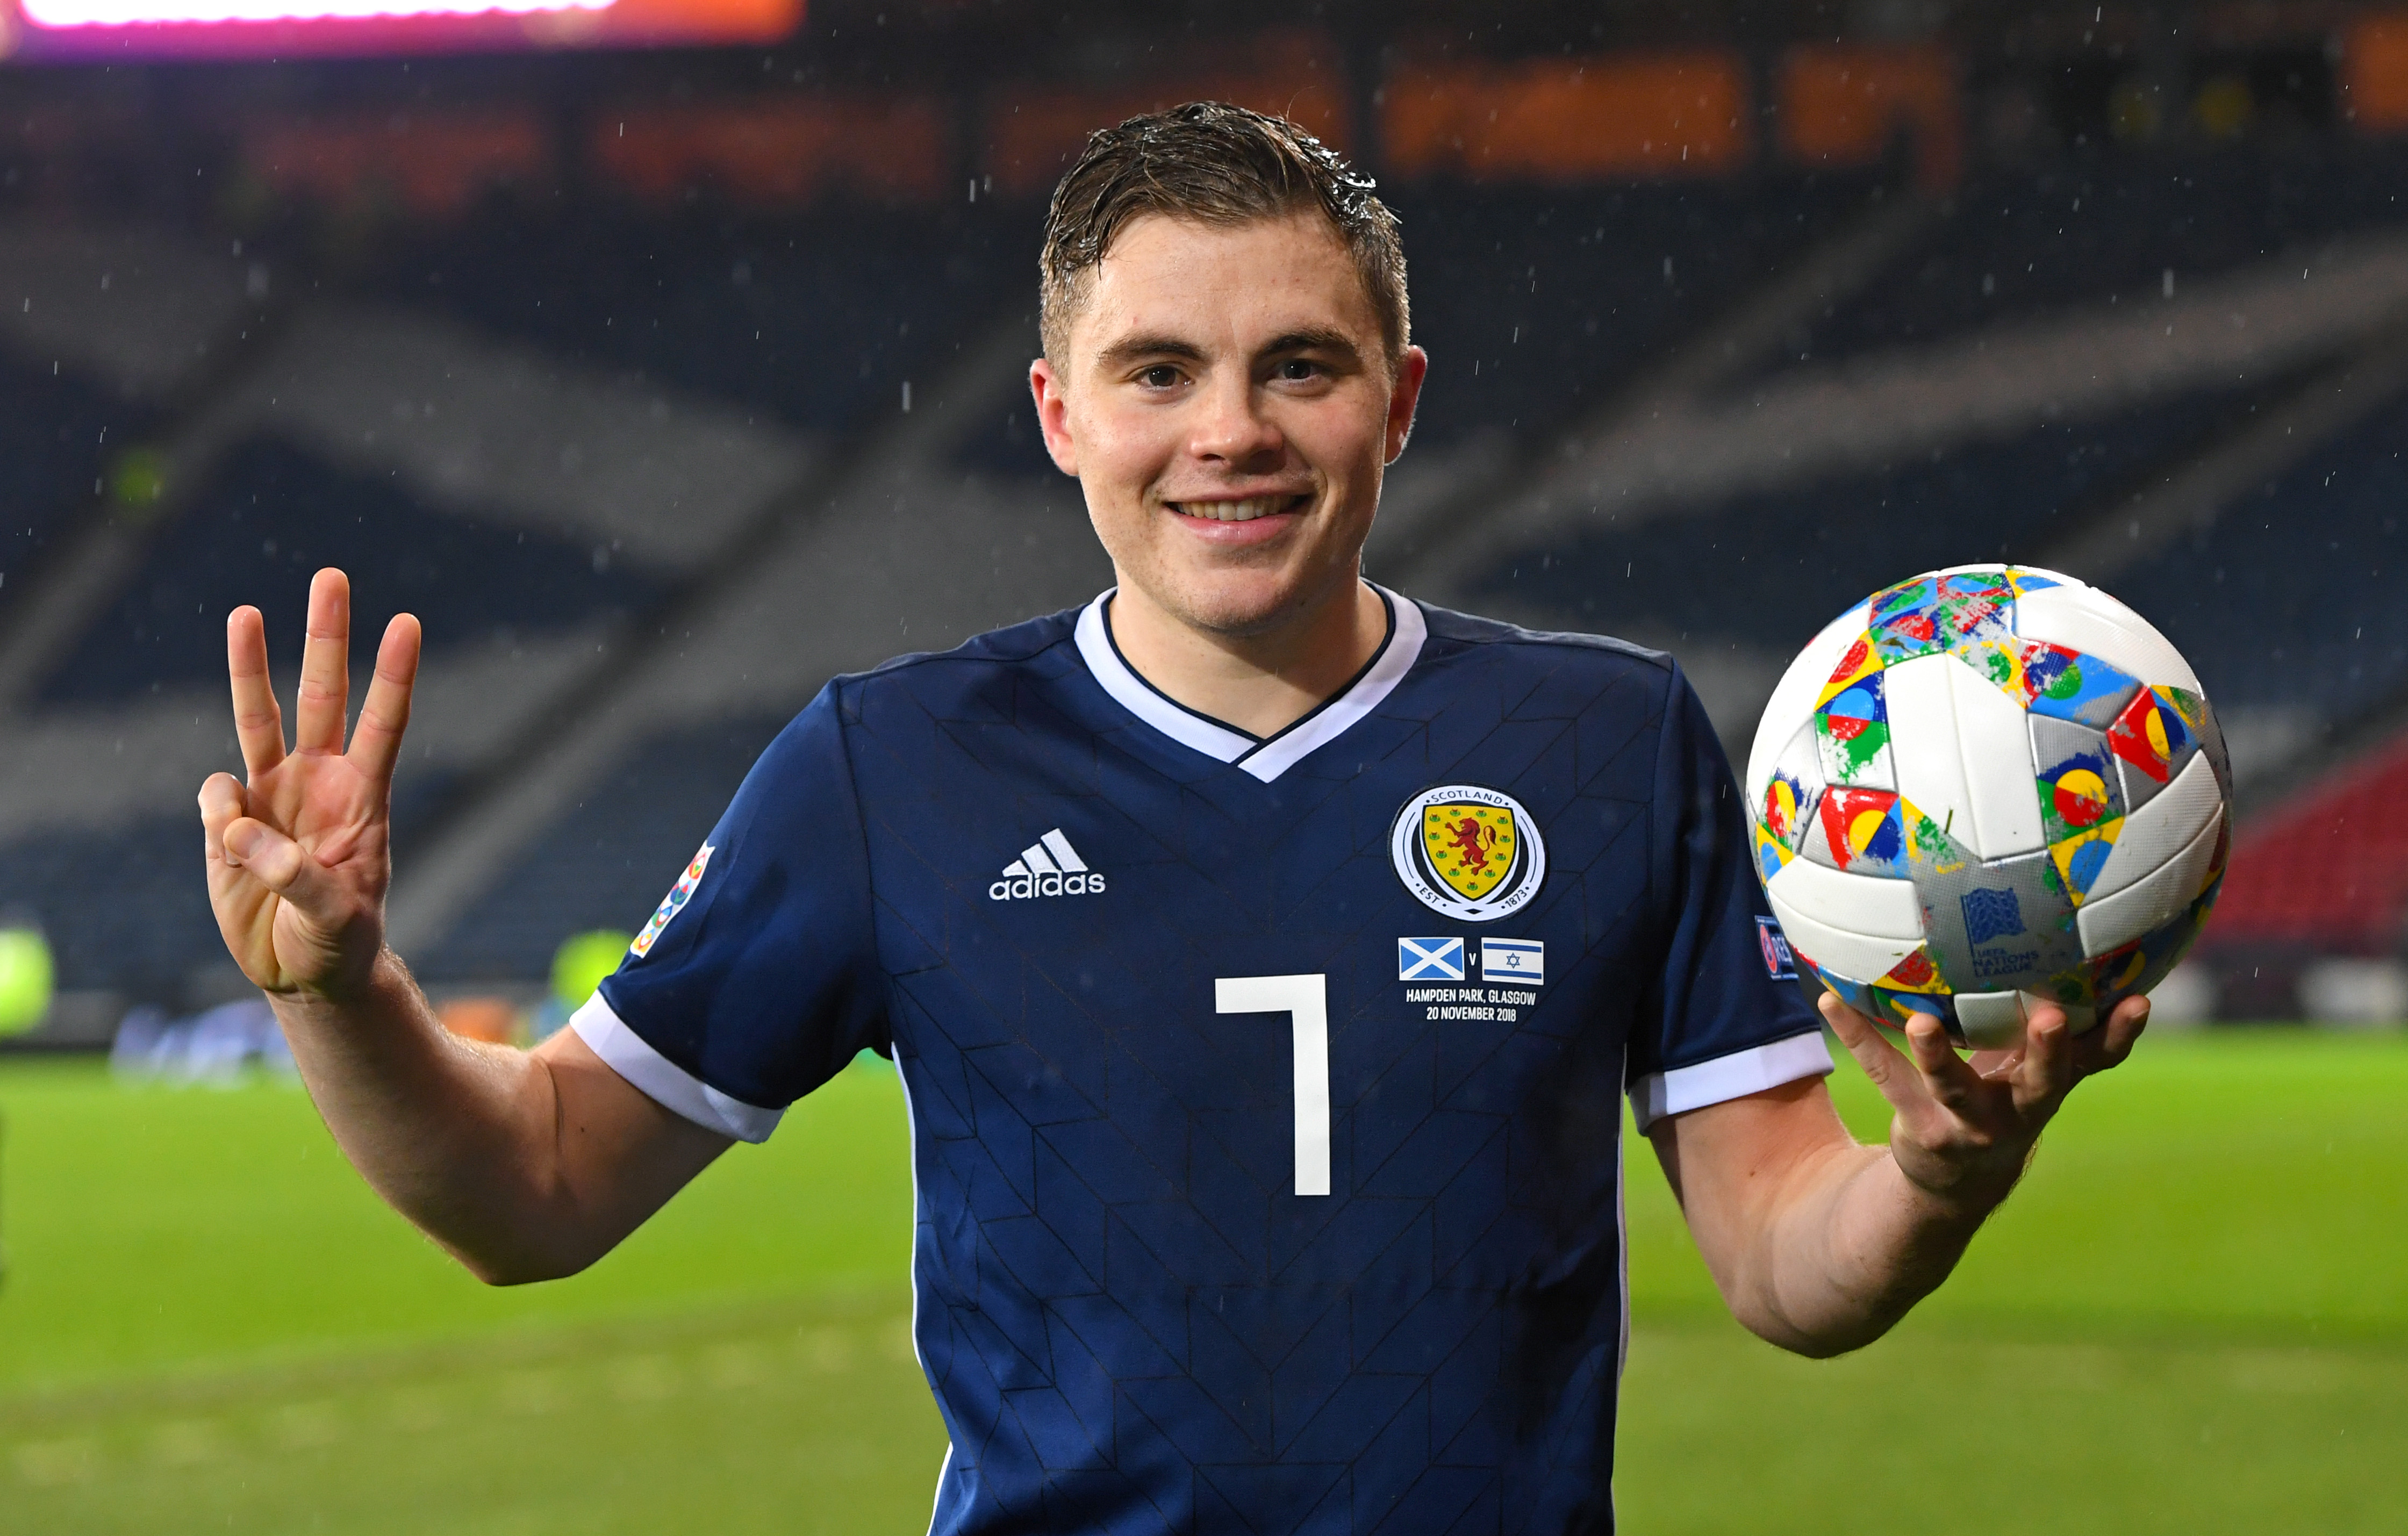 Scotland's James Forrest with the match ball at full time (SNS Group / Craig Williamson)